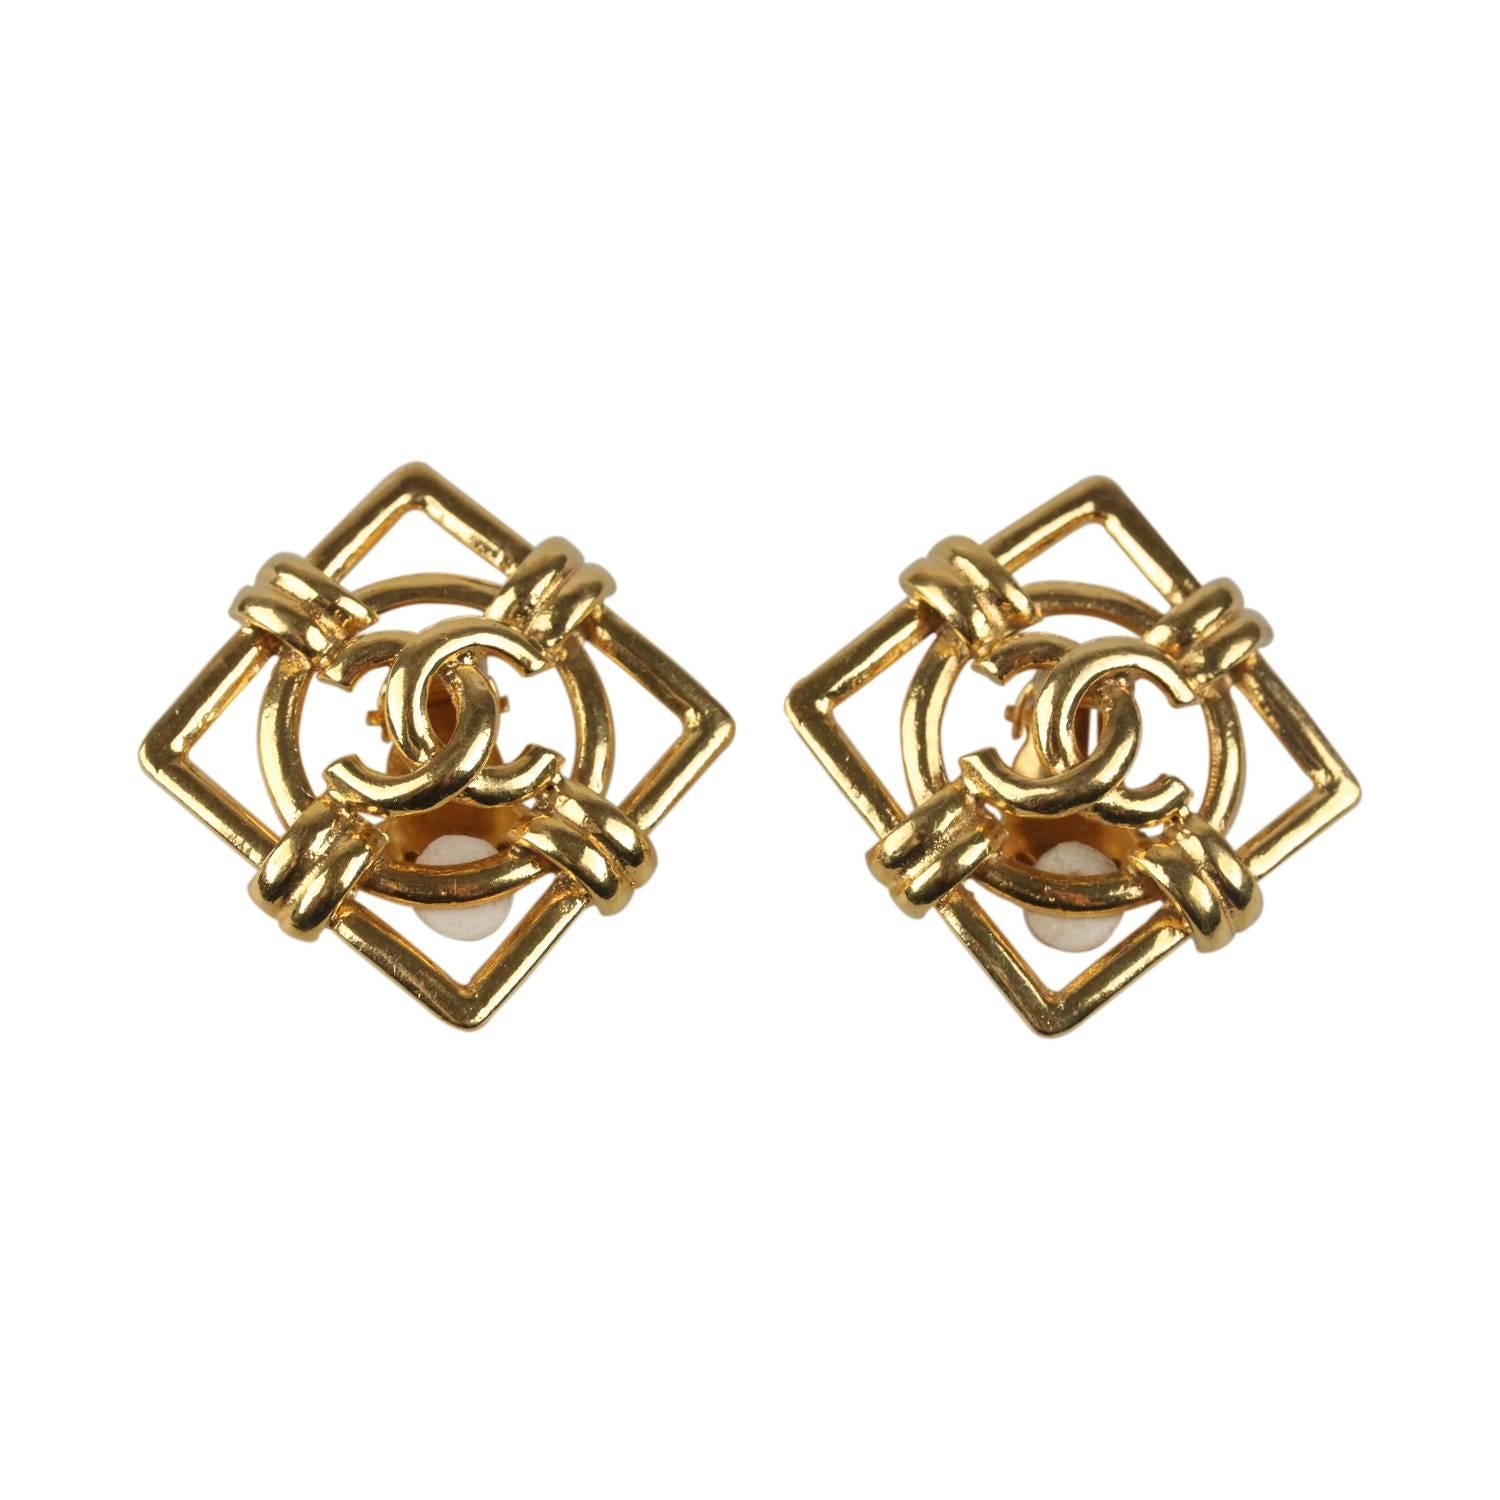 CHANEL Vintage Gold Metal Square Clip On CC Logo Earrings